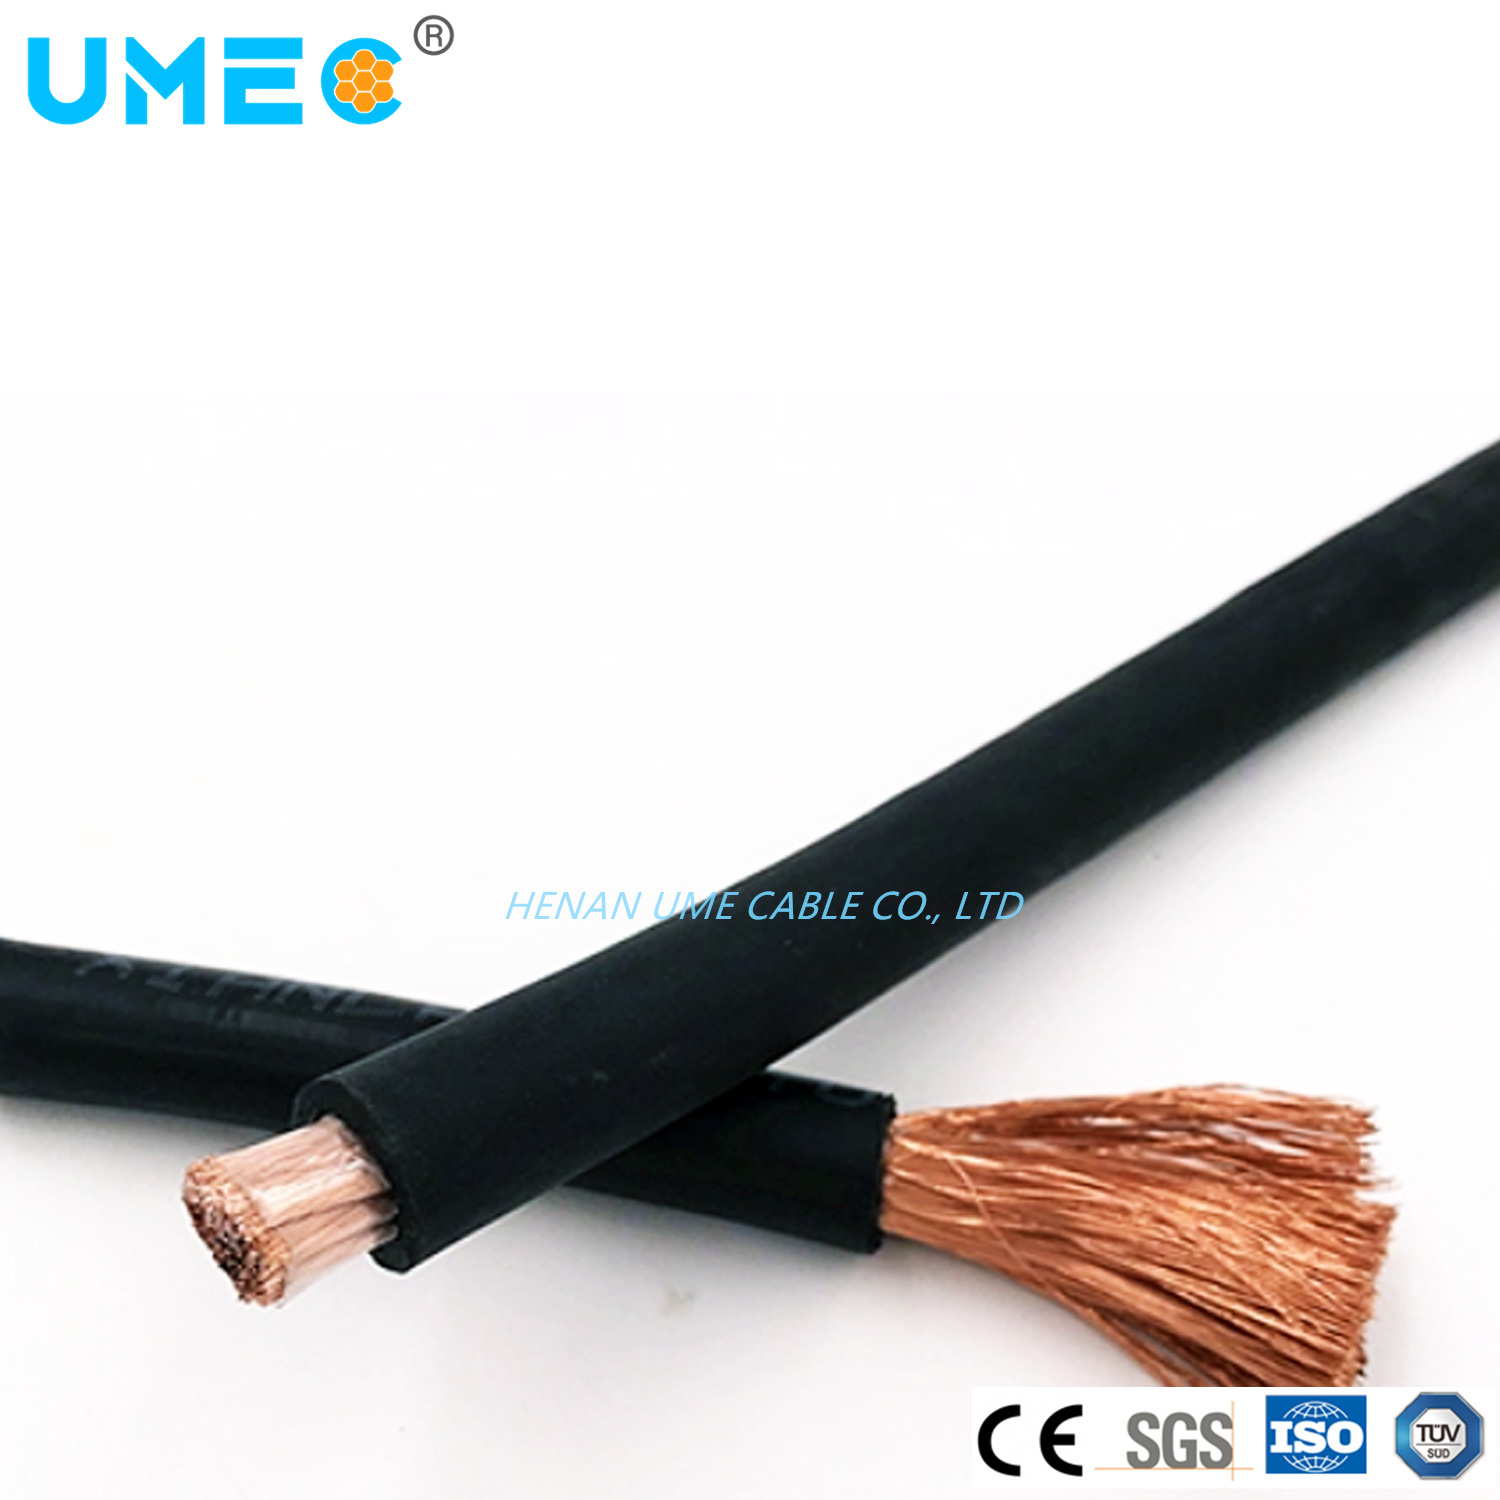 Electrical Construction Equipment Welding Machine Rubber Cable Welding Cable